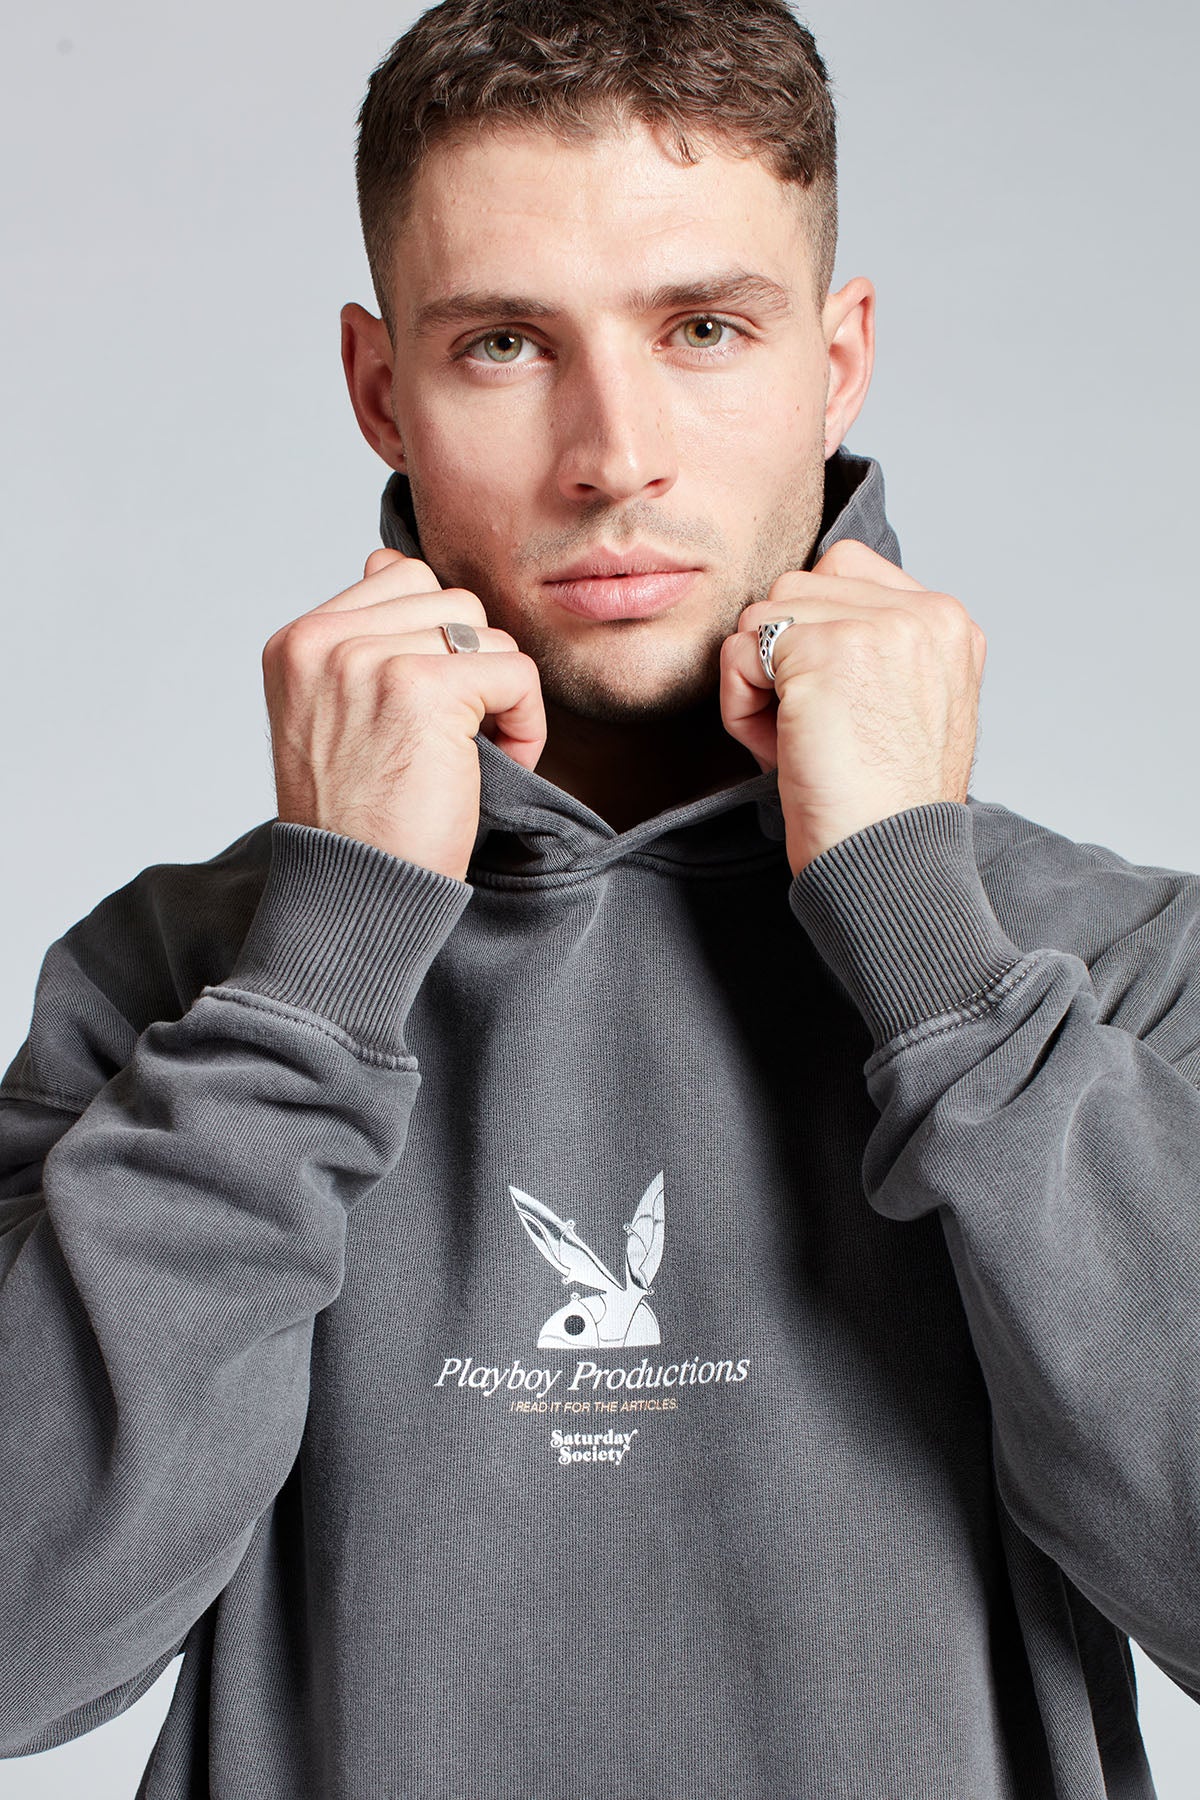 Playboy Chrome Hoodie in Washed Grey